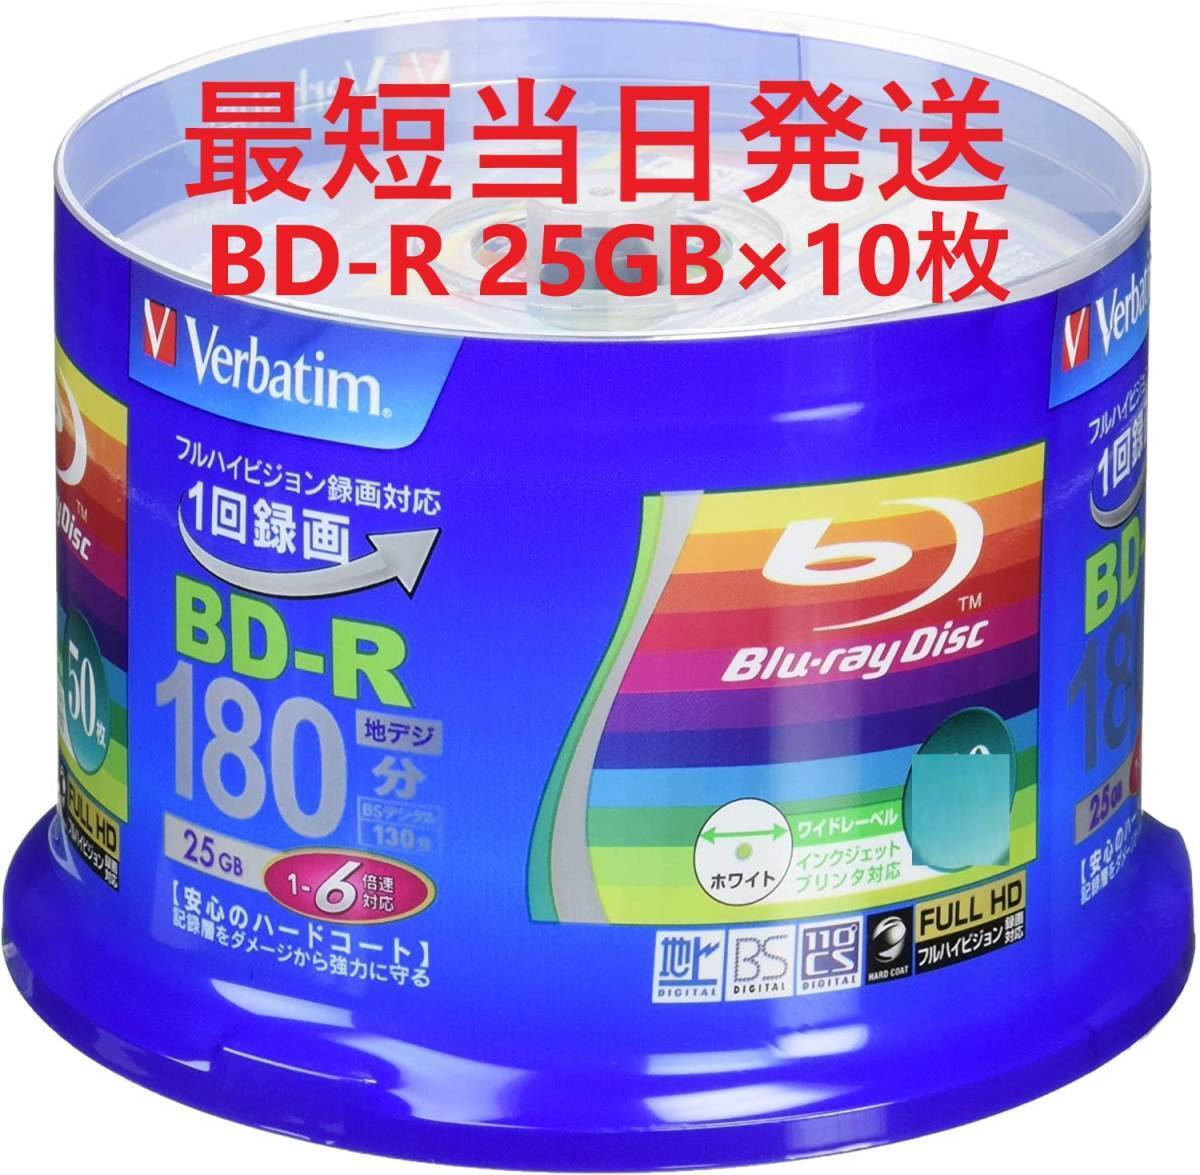  coupon use possible free shipping BD-R 10 sheets Blue-ray disk Mitsubishi Chemical media MITSUBISHI Verbatim 1 times video recording for 25GB anonymity delivery unused 